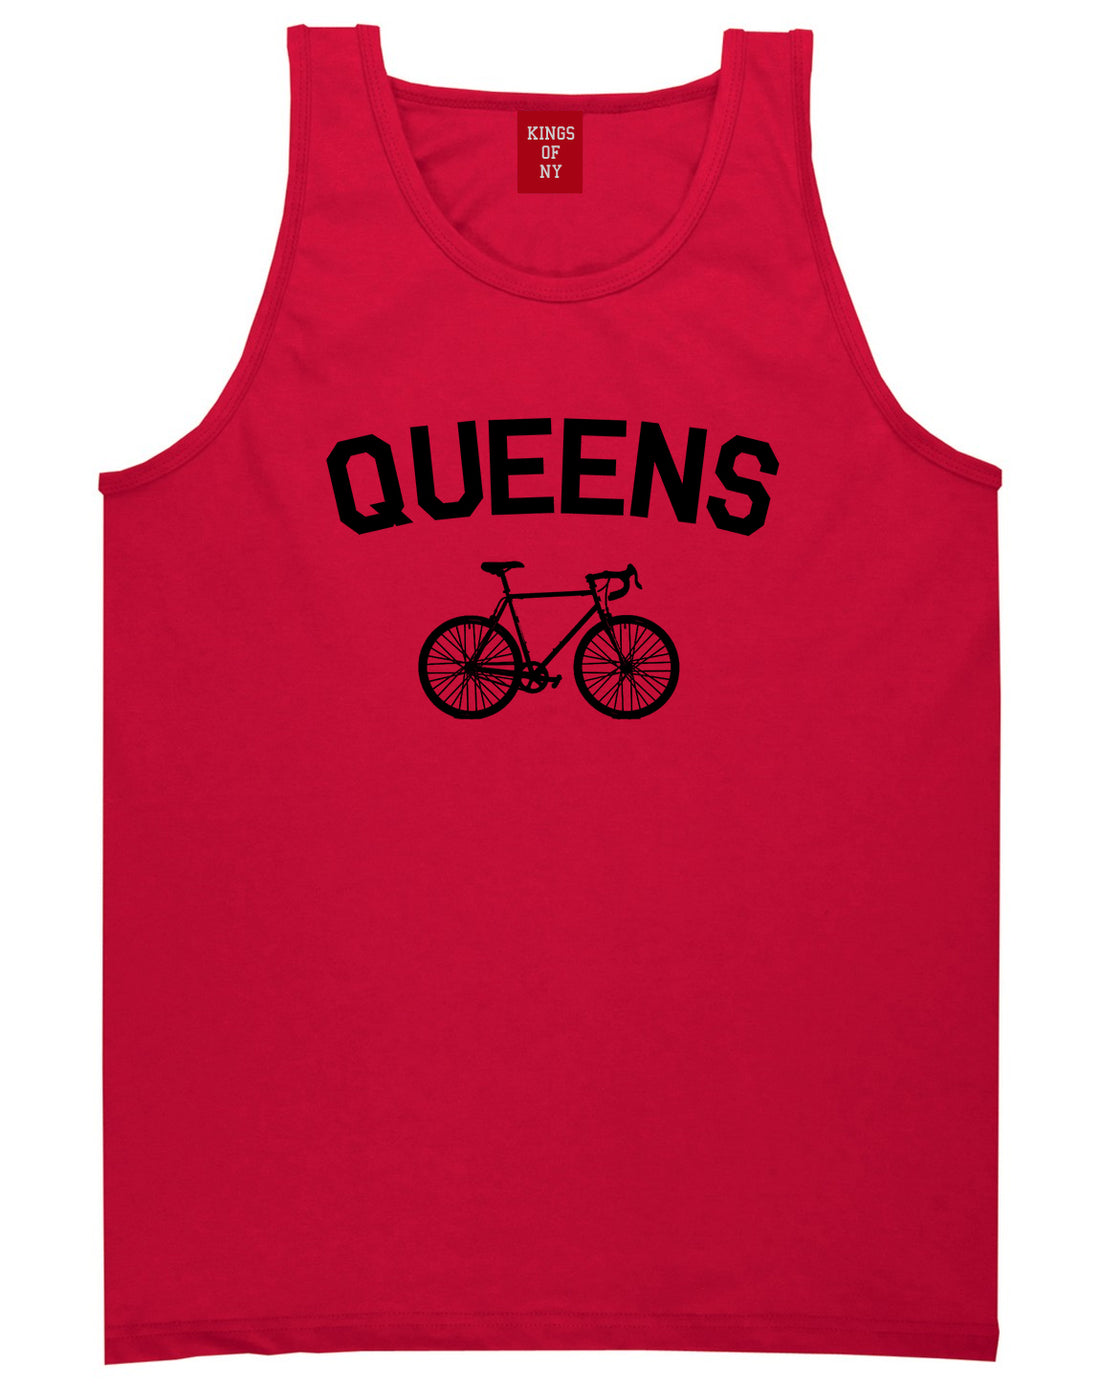 Queens New York Vintage Bike Cycling Mens Tank Top T-Shirt Red